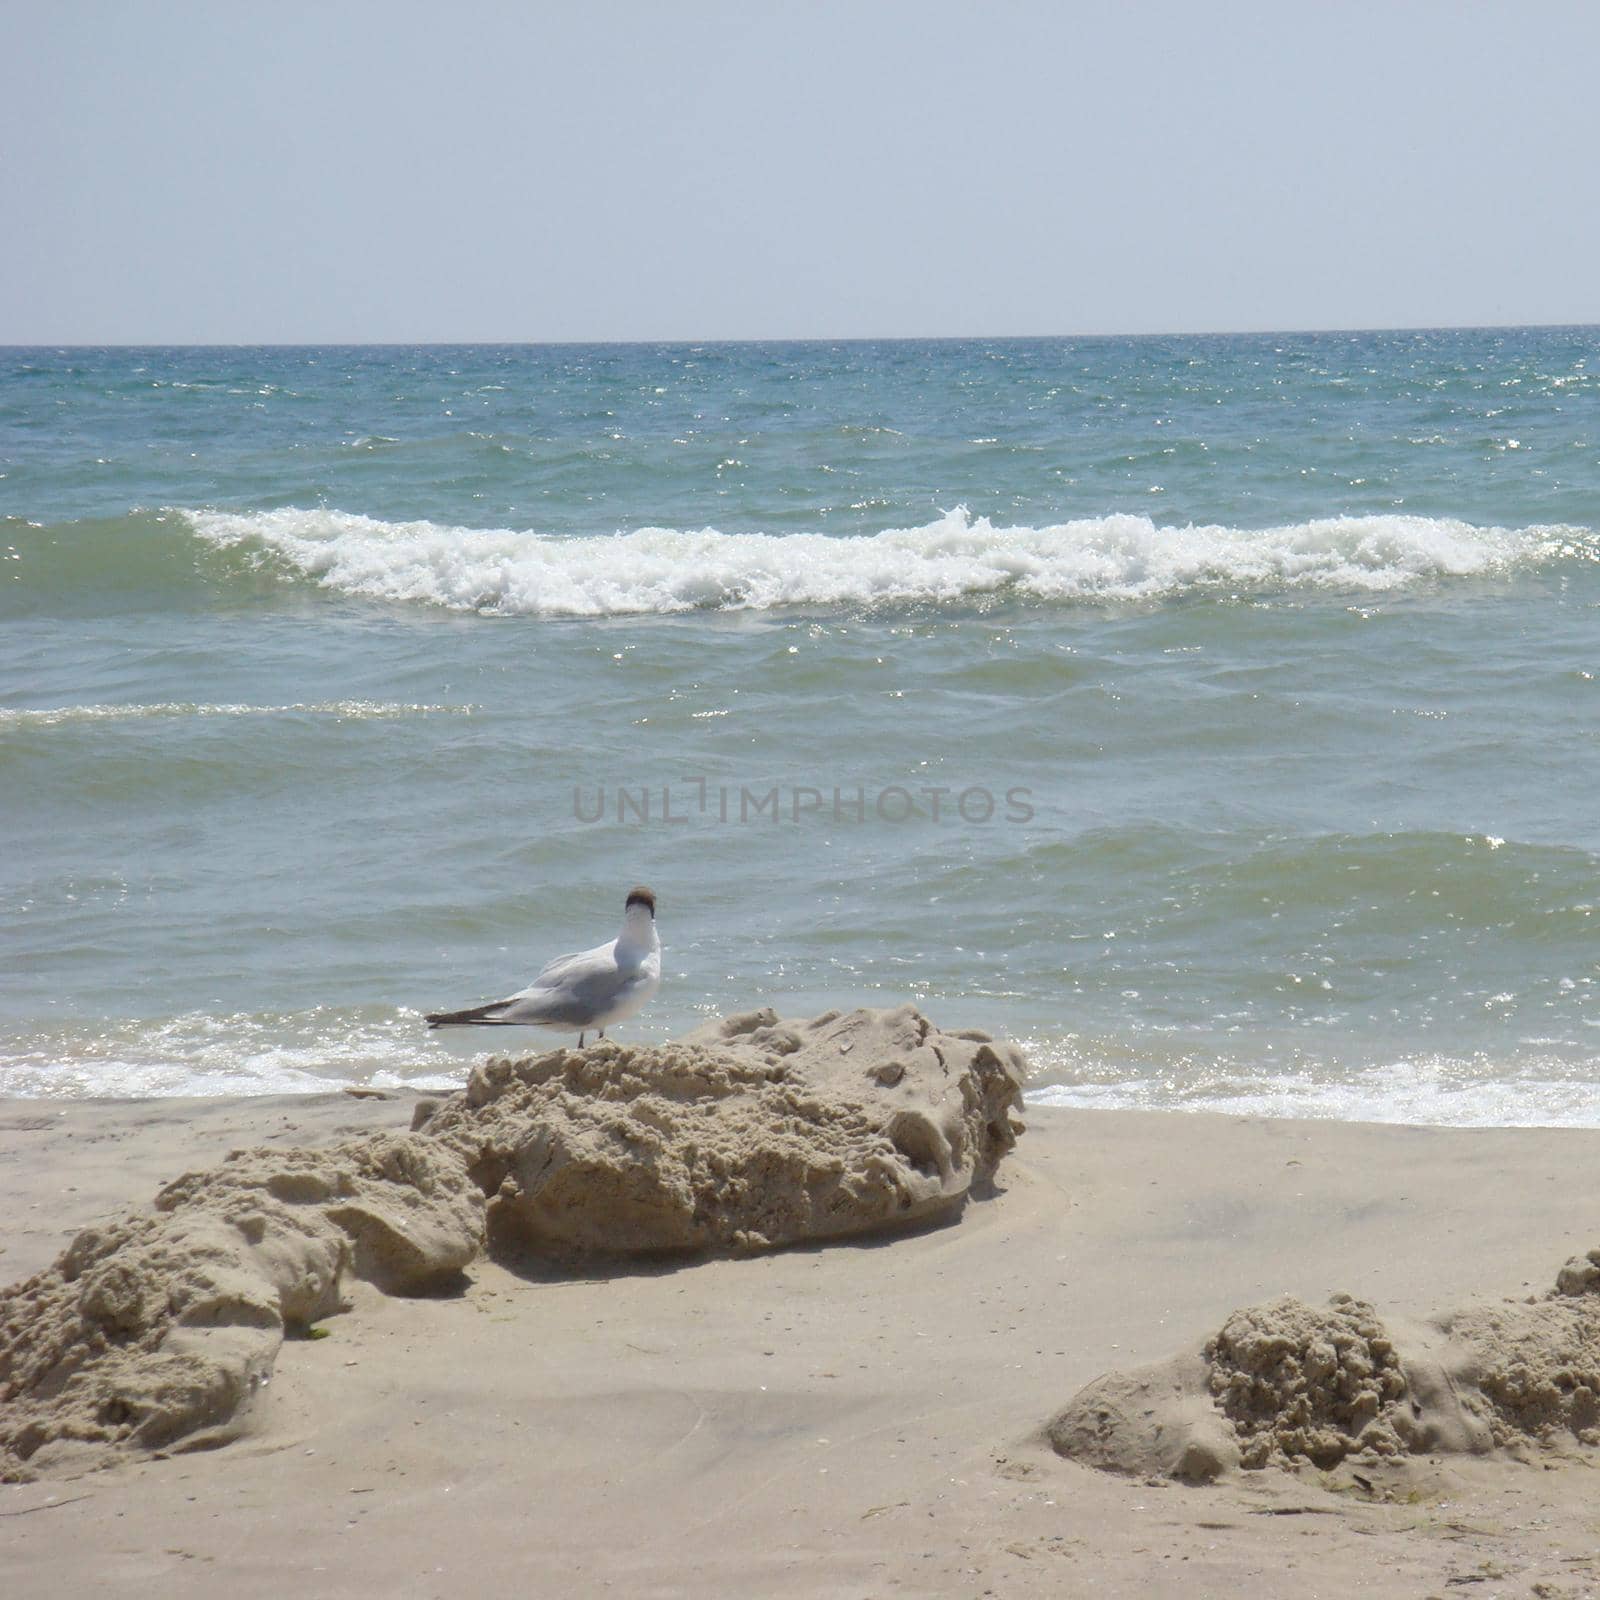 Sea gull standing on his feet on the beach. View of white birds seagulls walking by the beach against natural blue water background. Concept tourism, leisure at sea, summer time